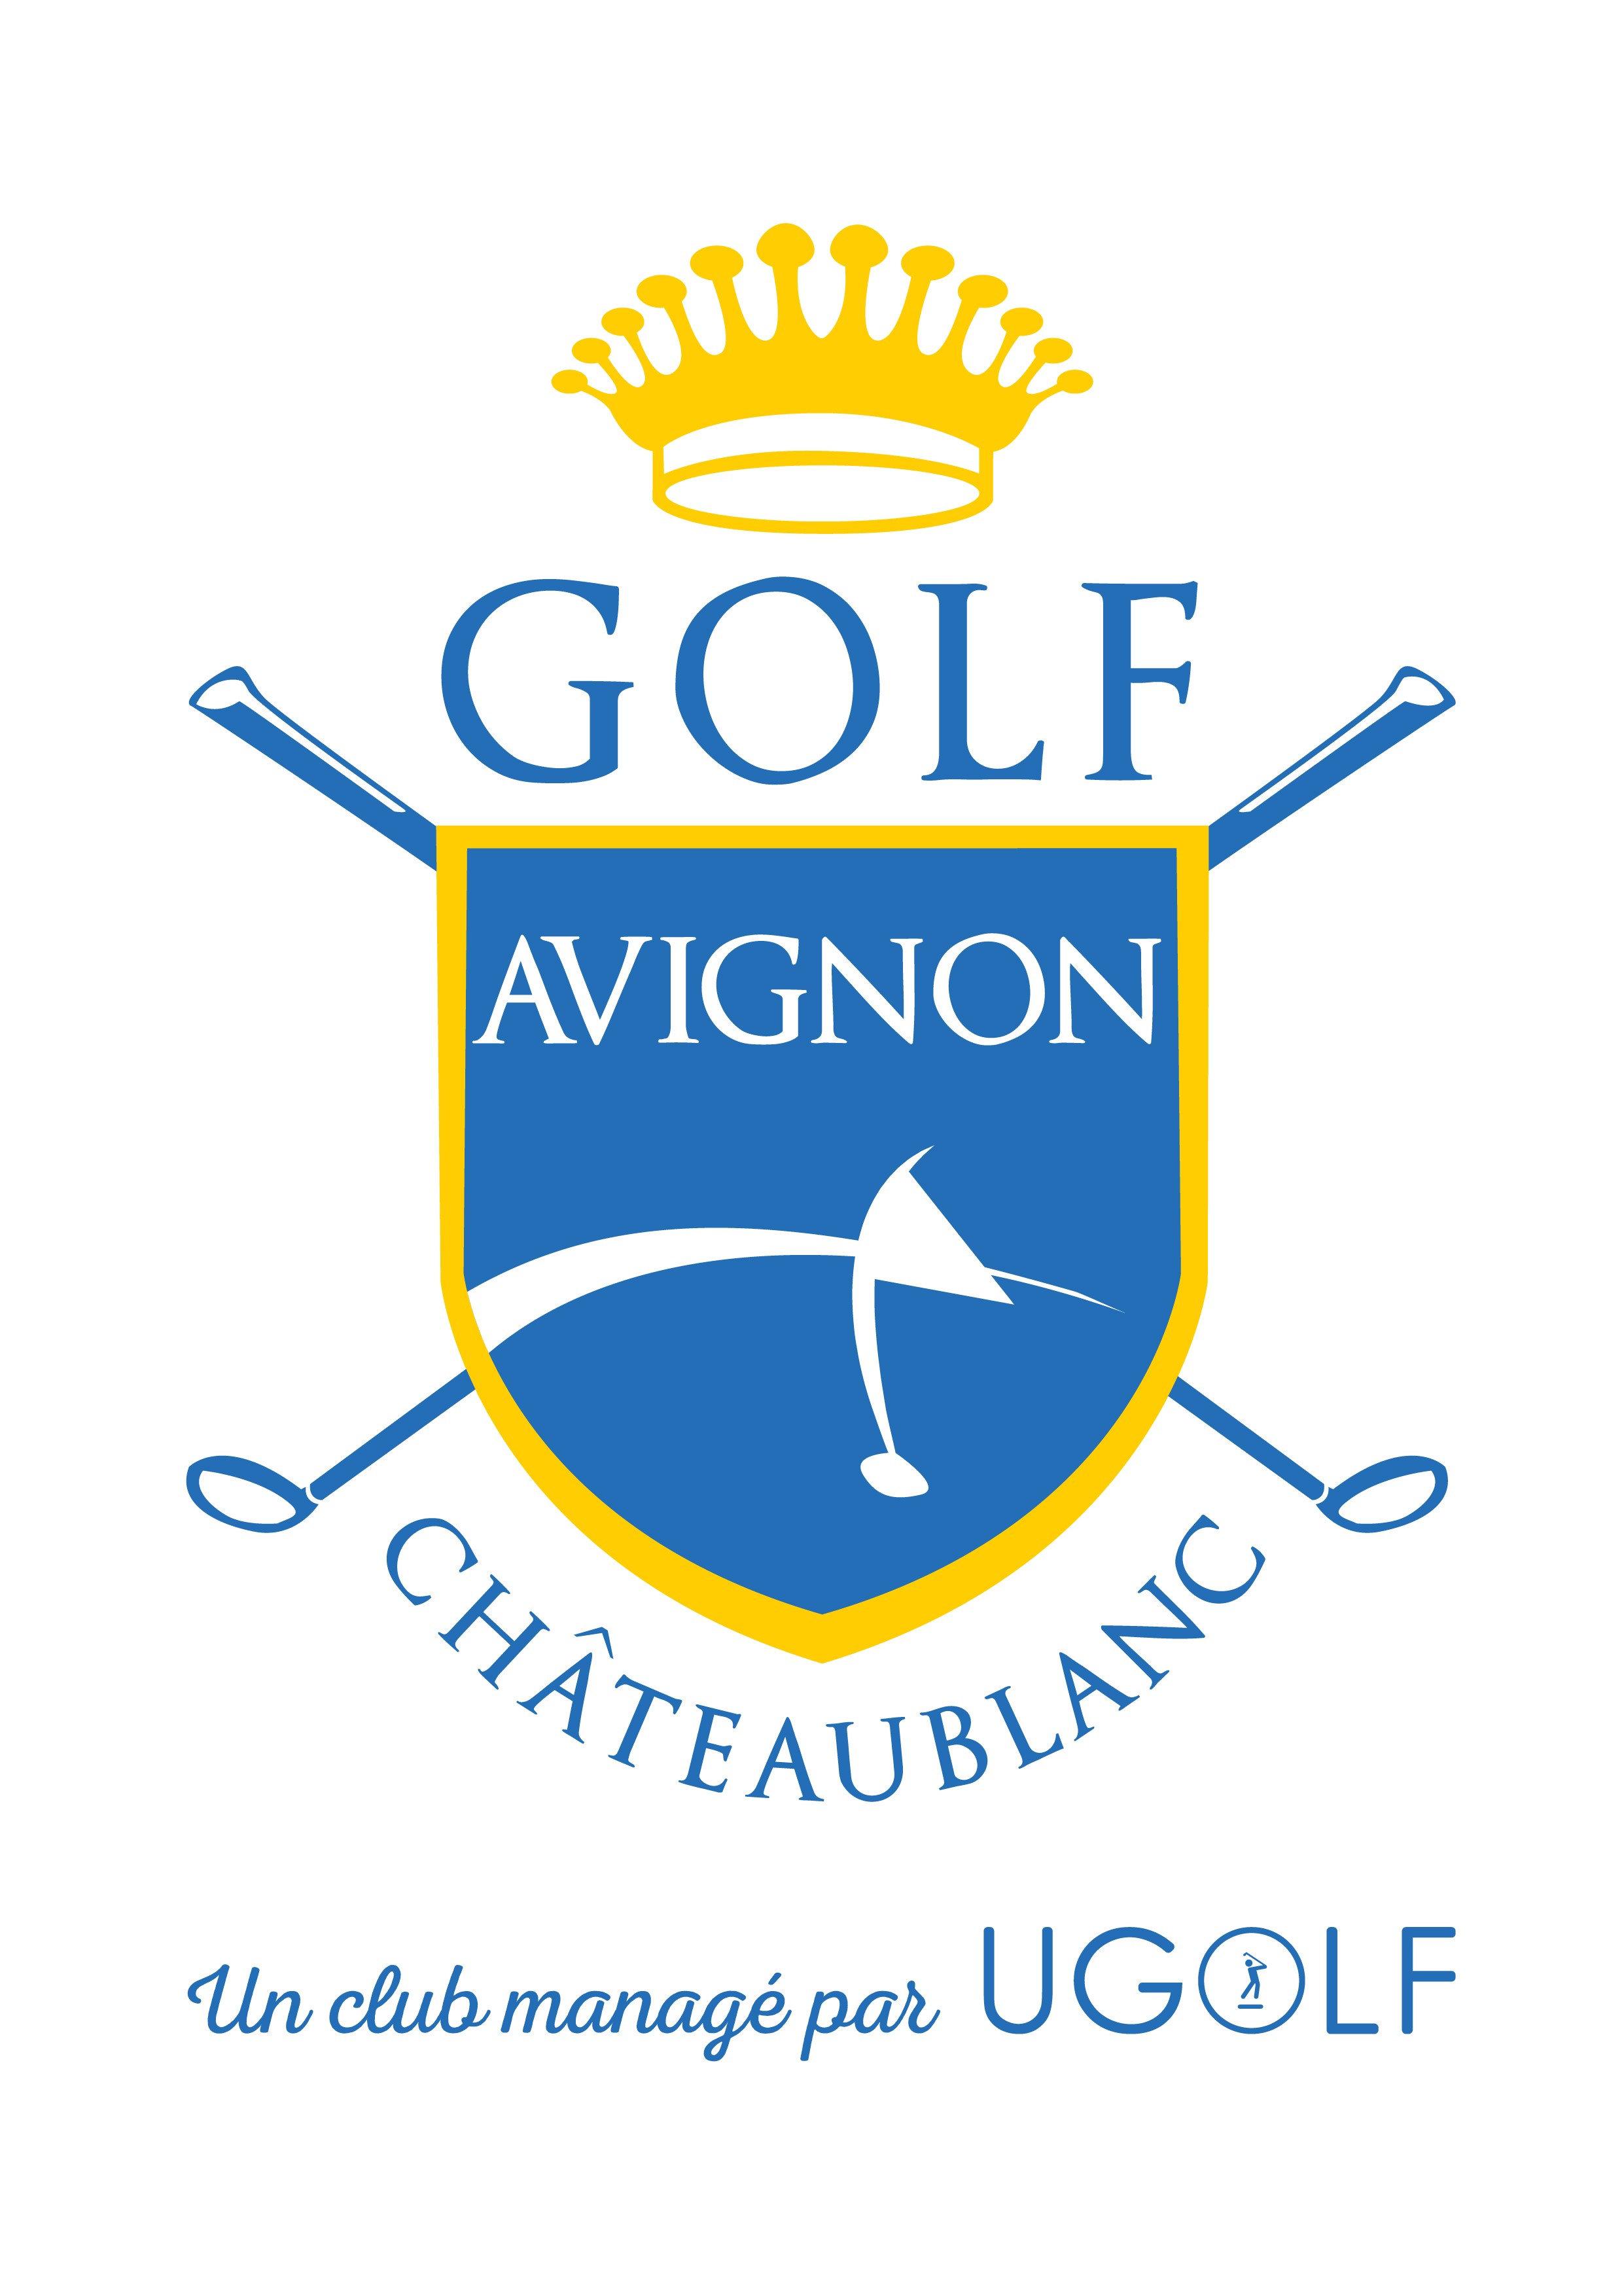 Golf Chateaublanc